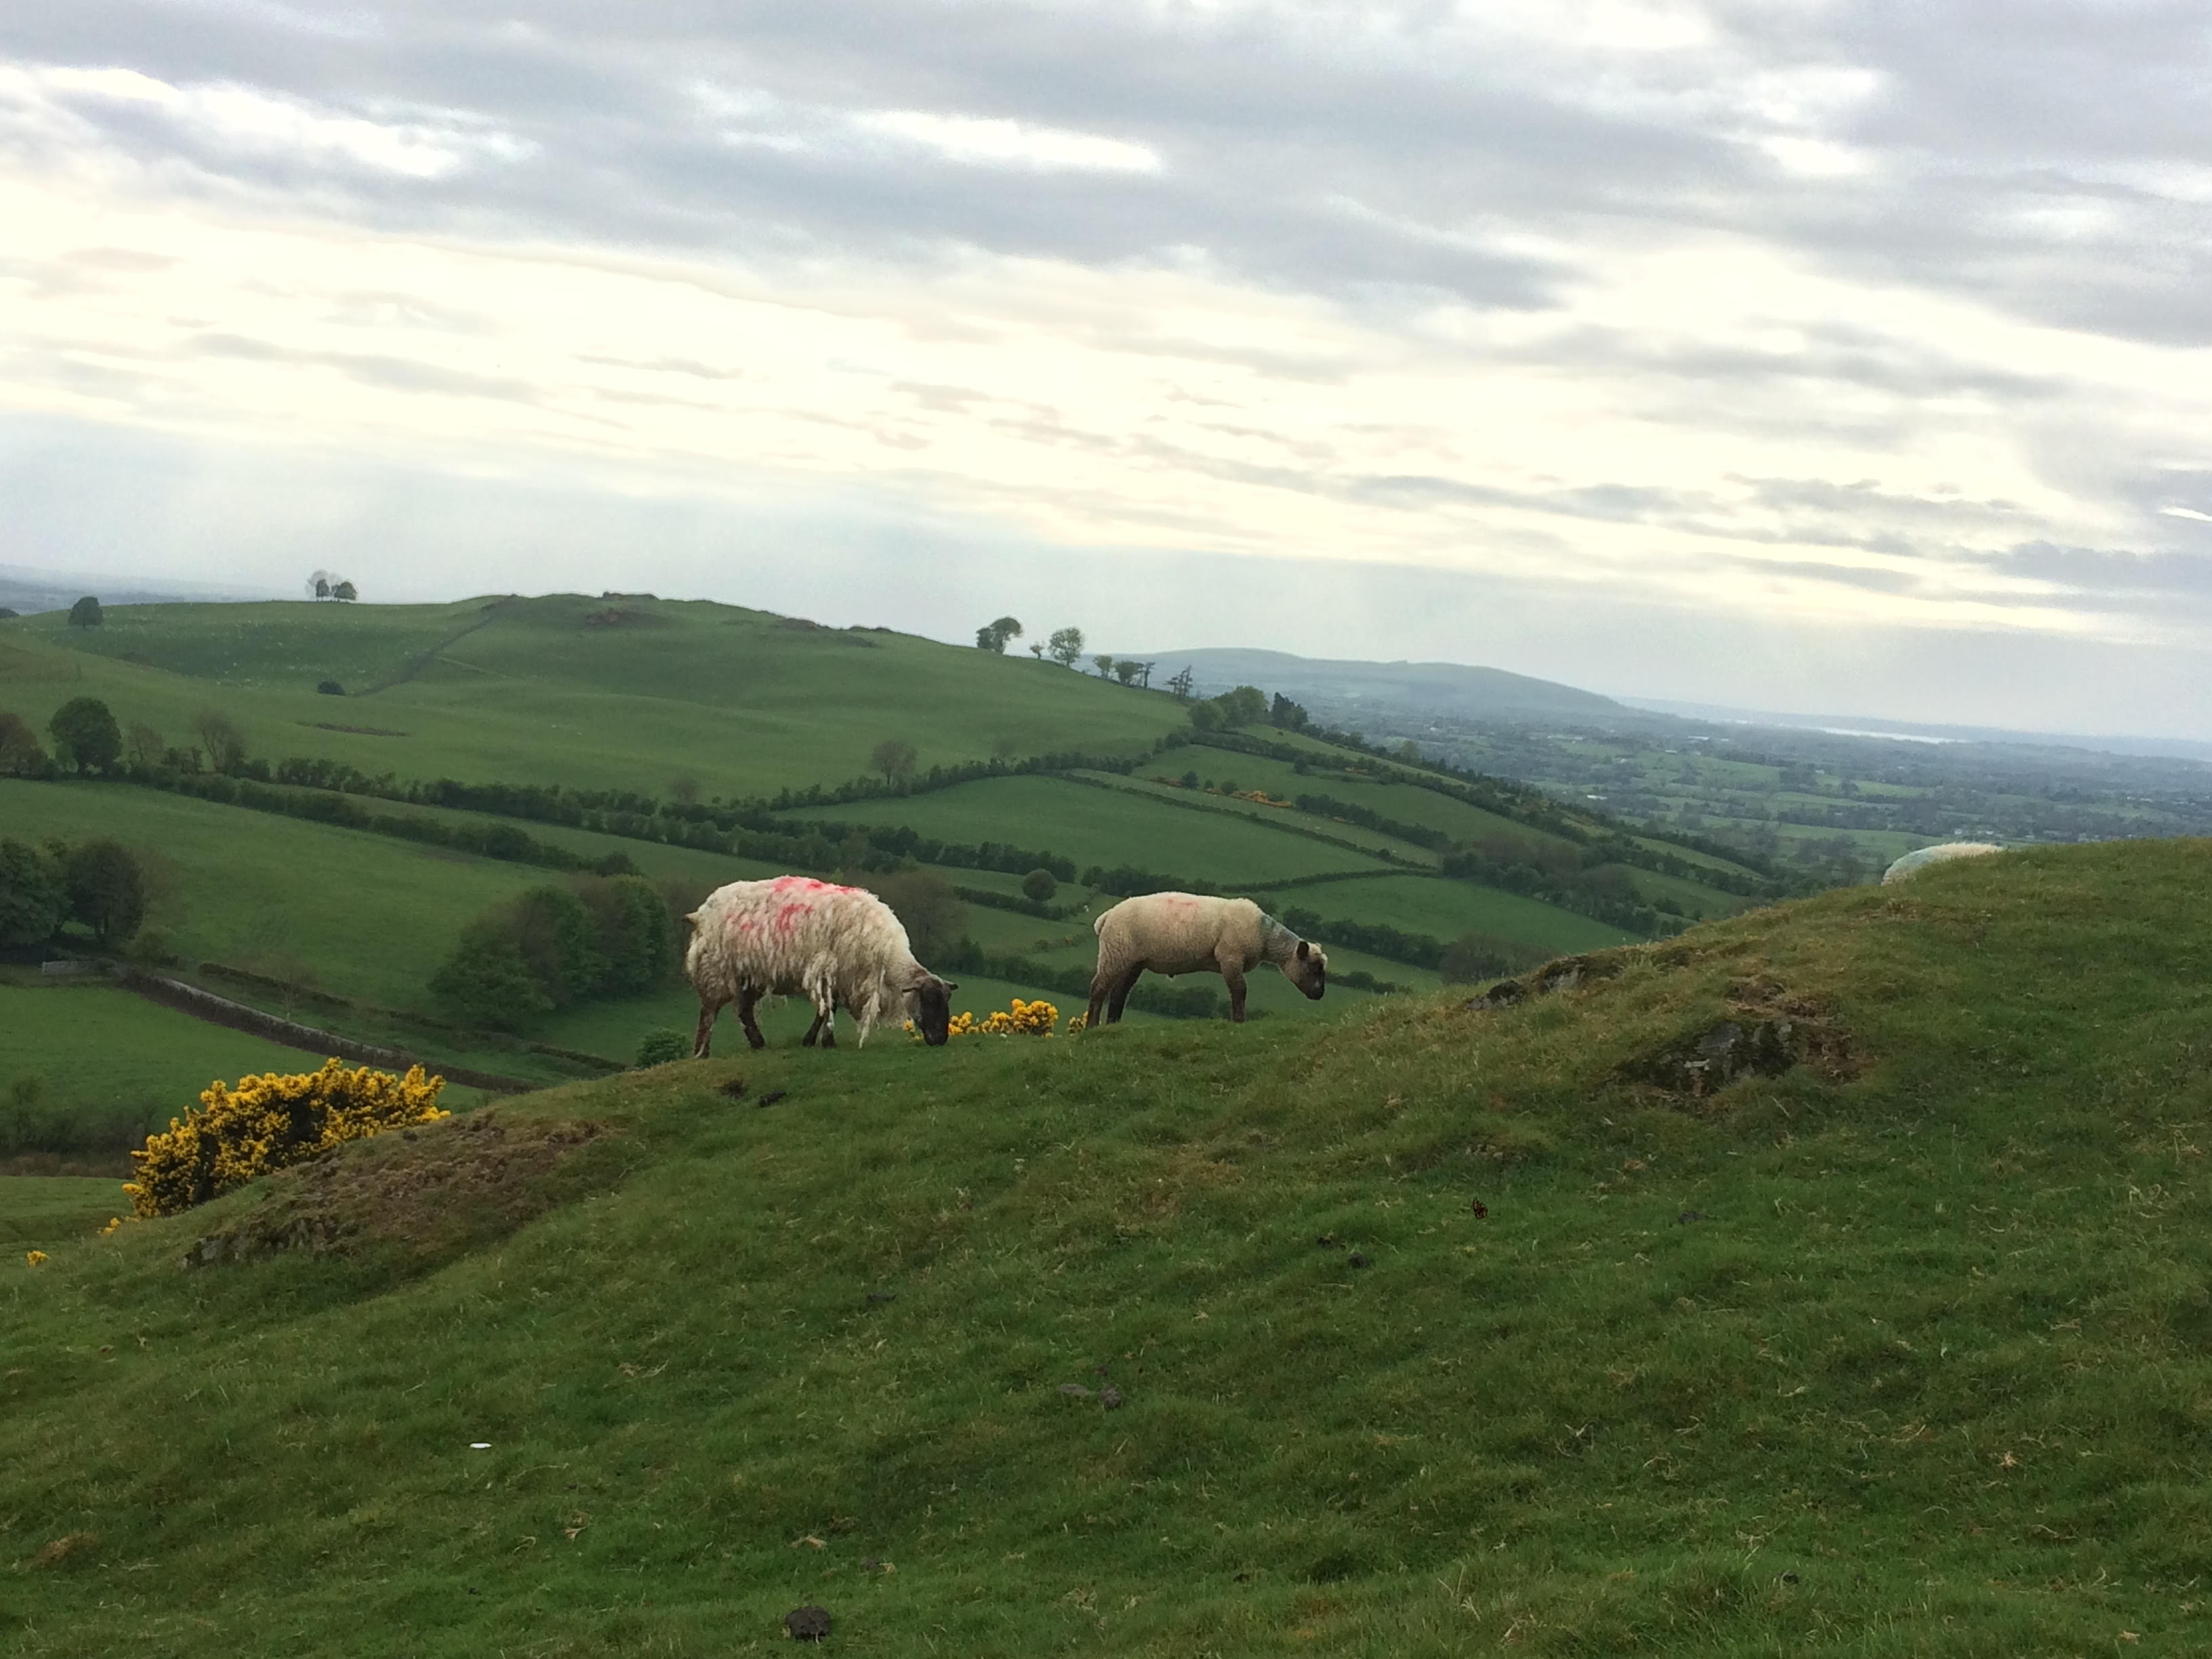 Sheep at pasture on the green hills of Ireland